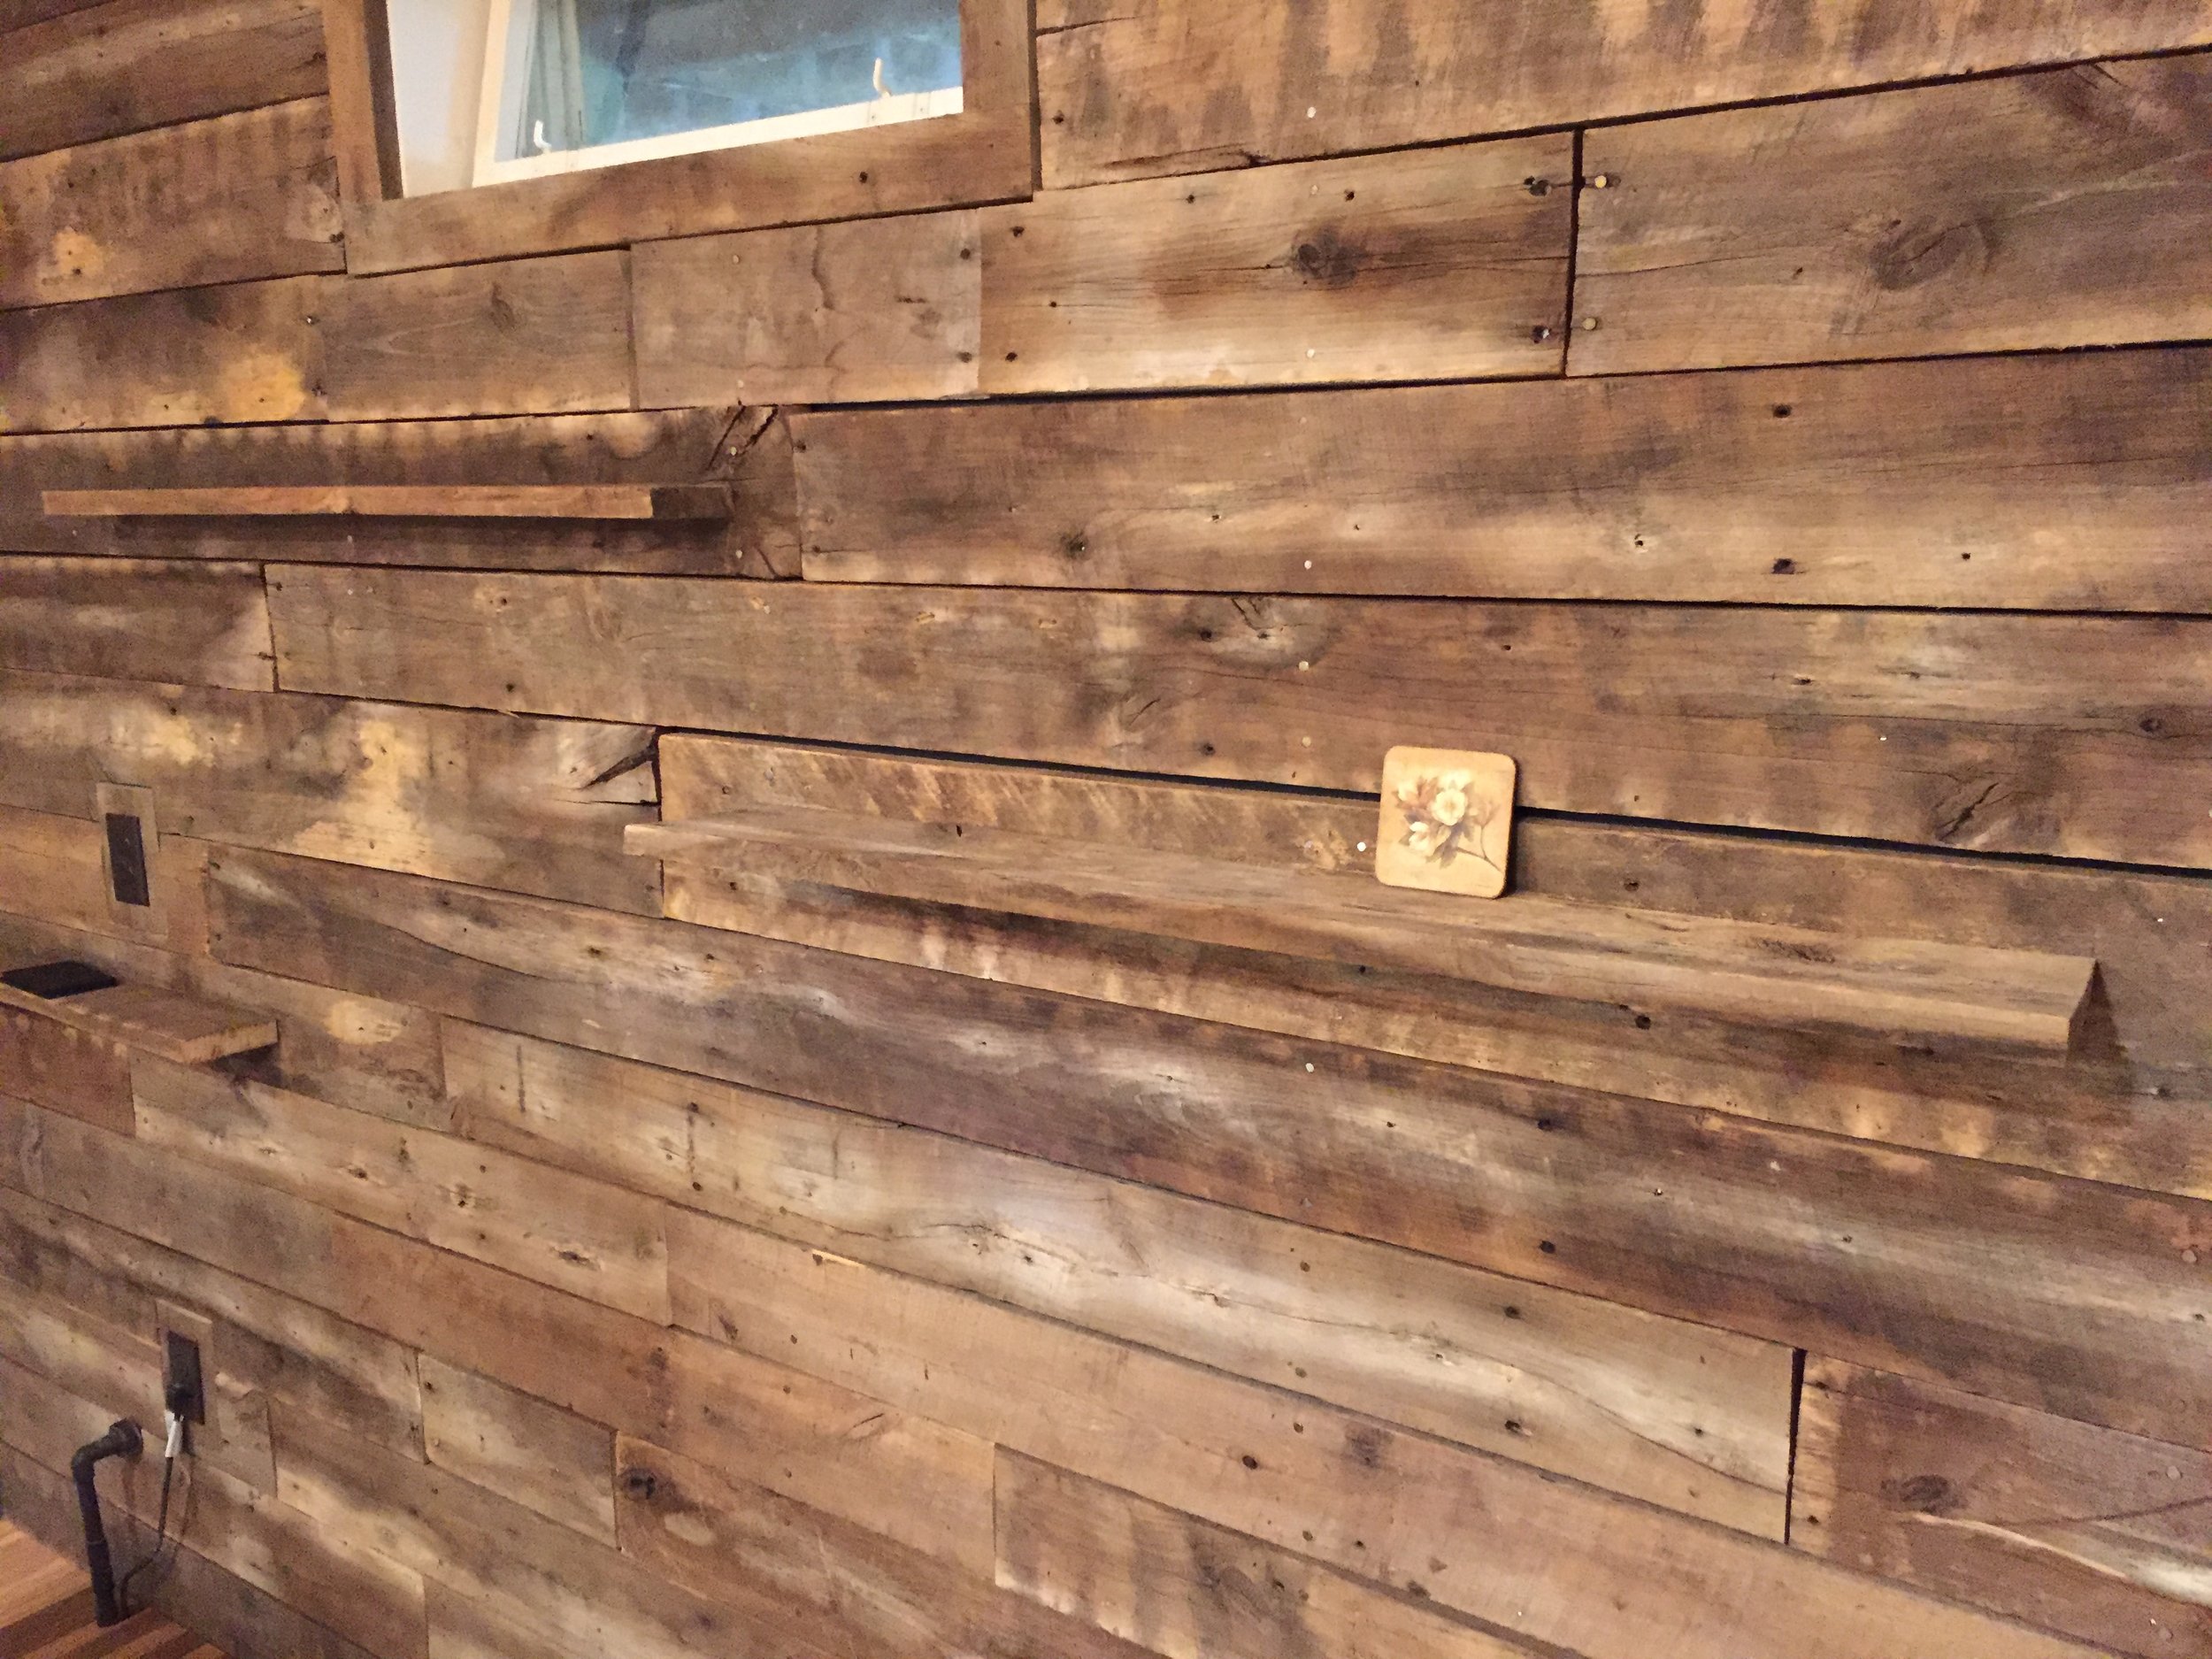  The back wall of the bar corner was sided in reclaimed barnwood. The crew carefully selected boards with nail holes to the give the wall more character. Some boards were turned on their side to create floating shelves. 